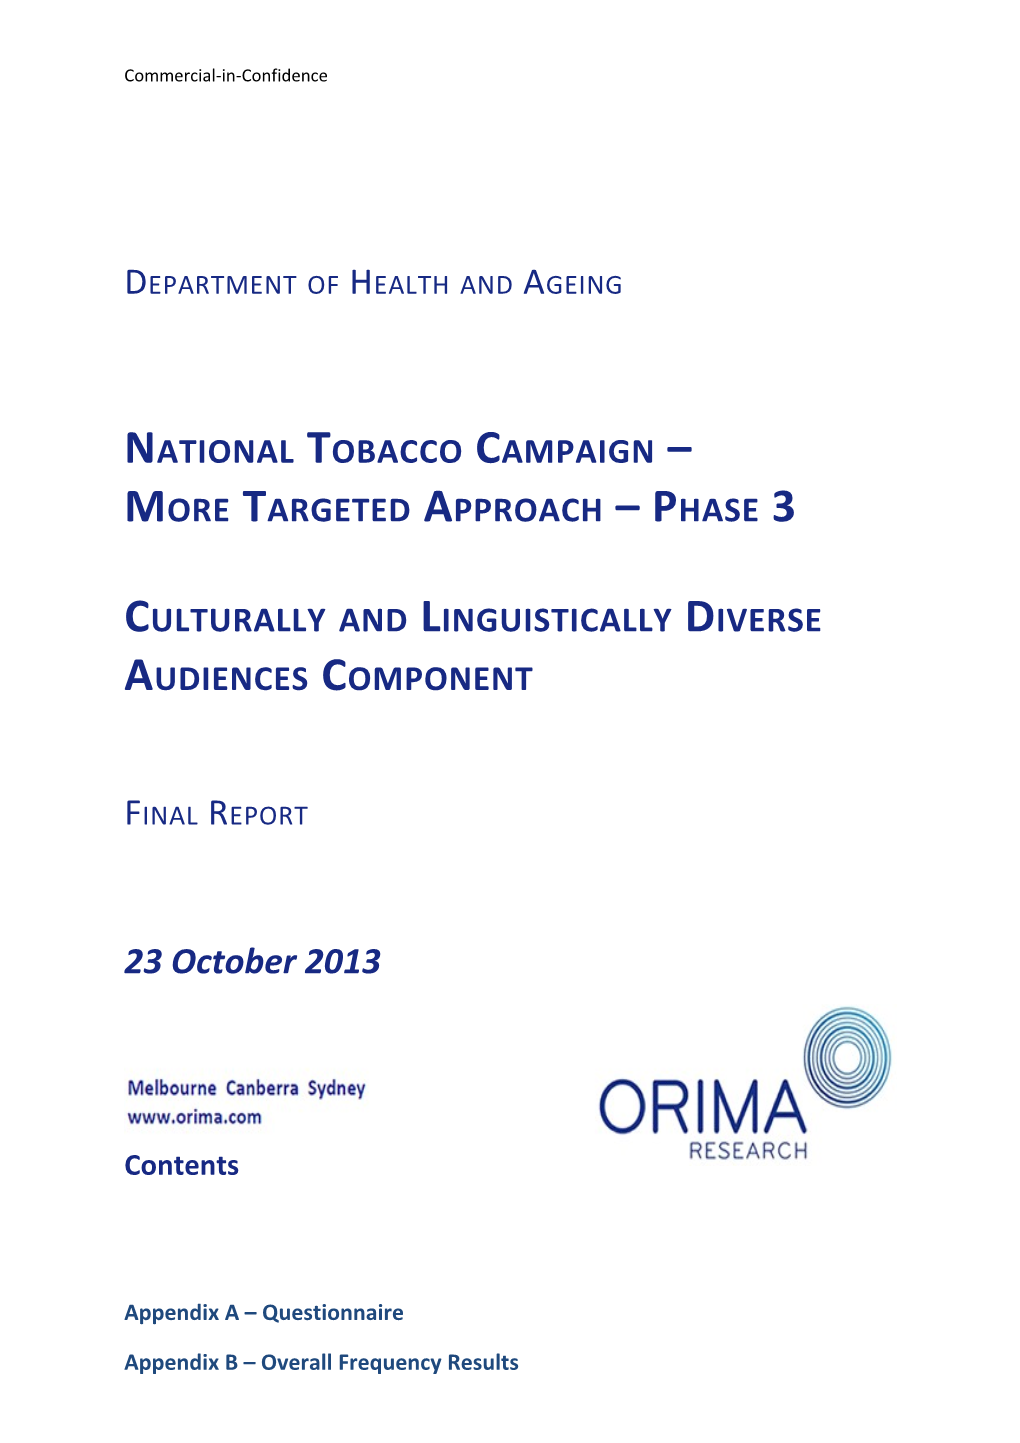 Department of Health and Ageing: National Tobacco Campaign More Targeted Approach Phase